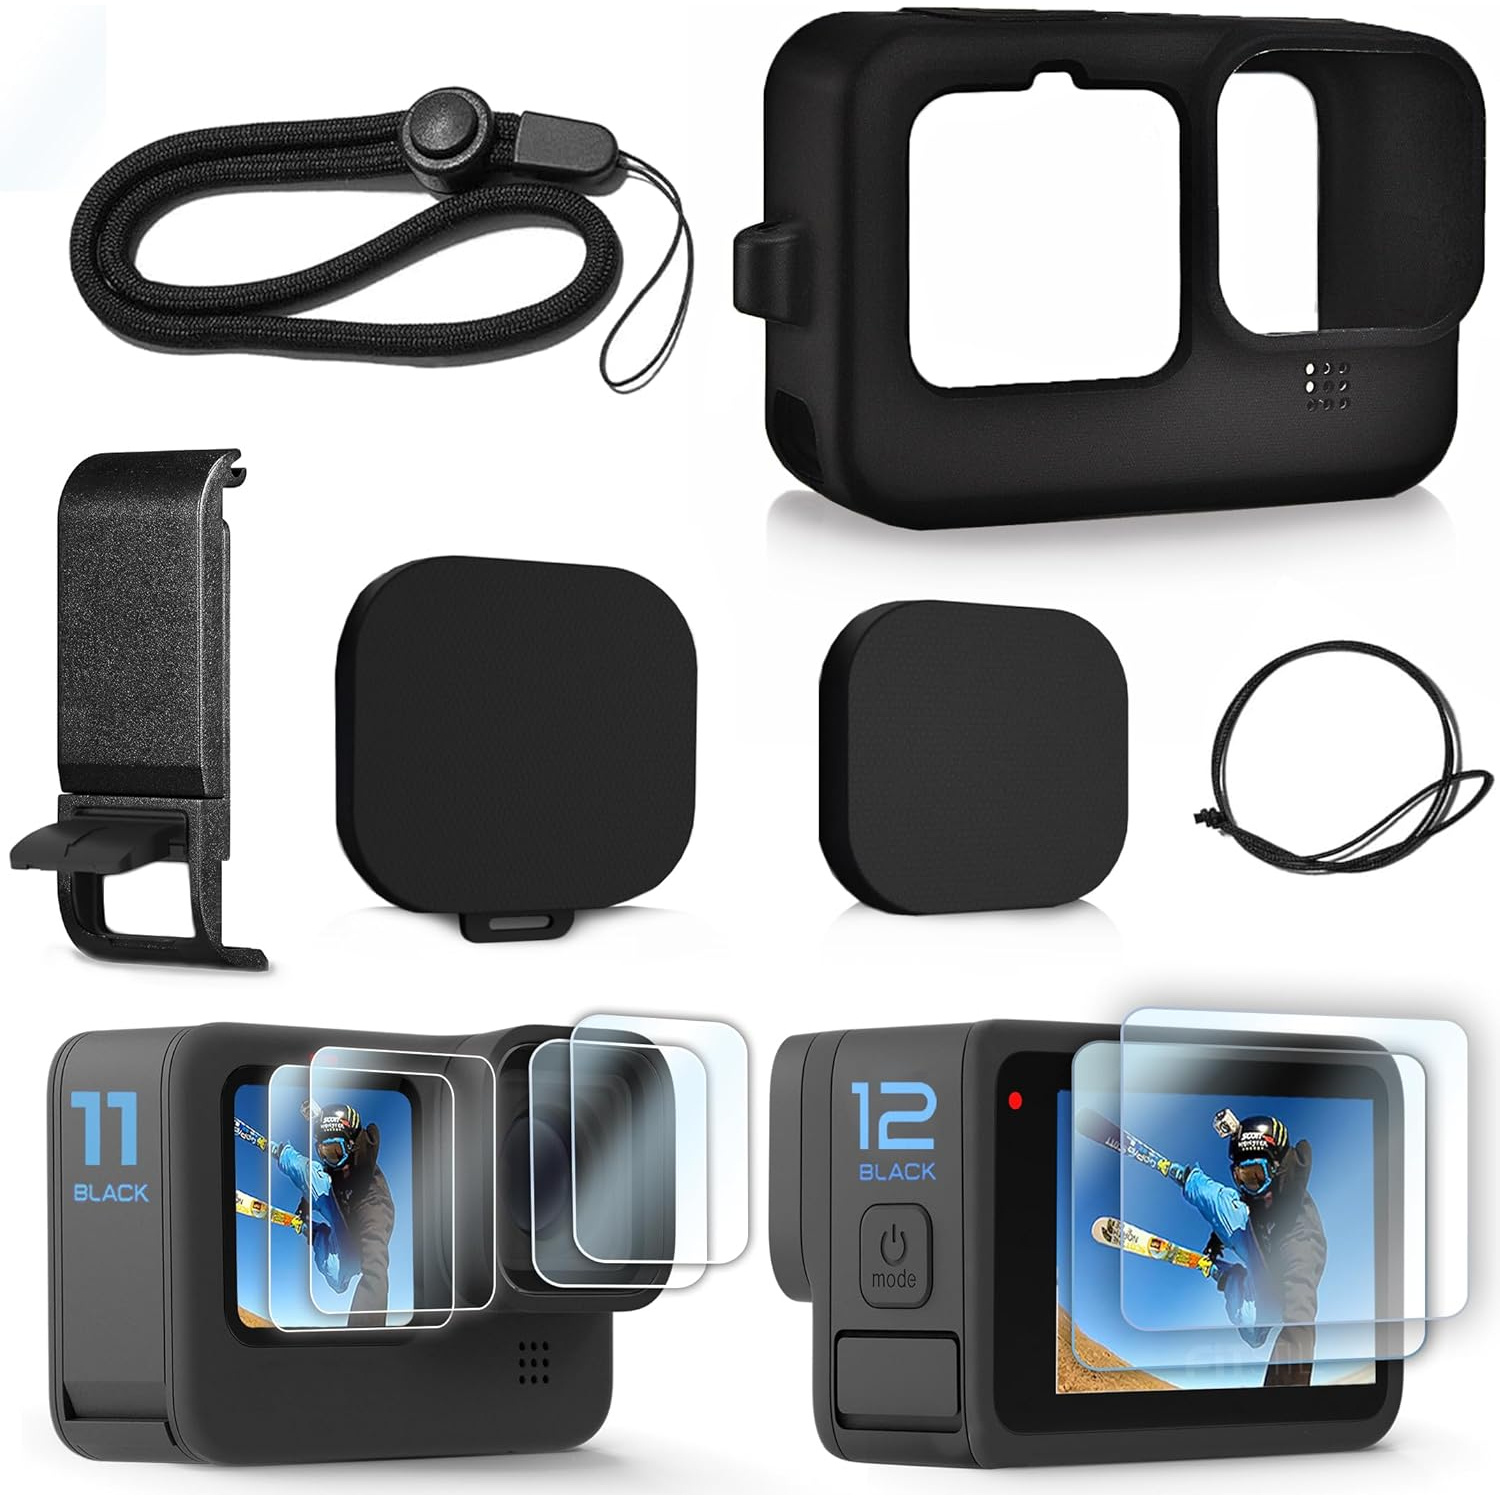 

Black Silicone Sleeve Case For Go Pro Hero 12/11/10/9, Battery Side Cover&screen Protectors&lens Caps&lanyard Black Accessories Kit(no Camera)